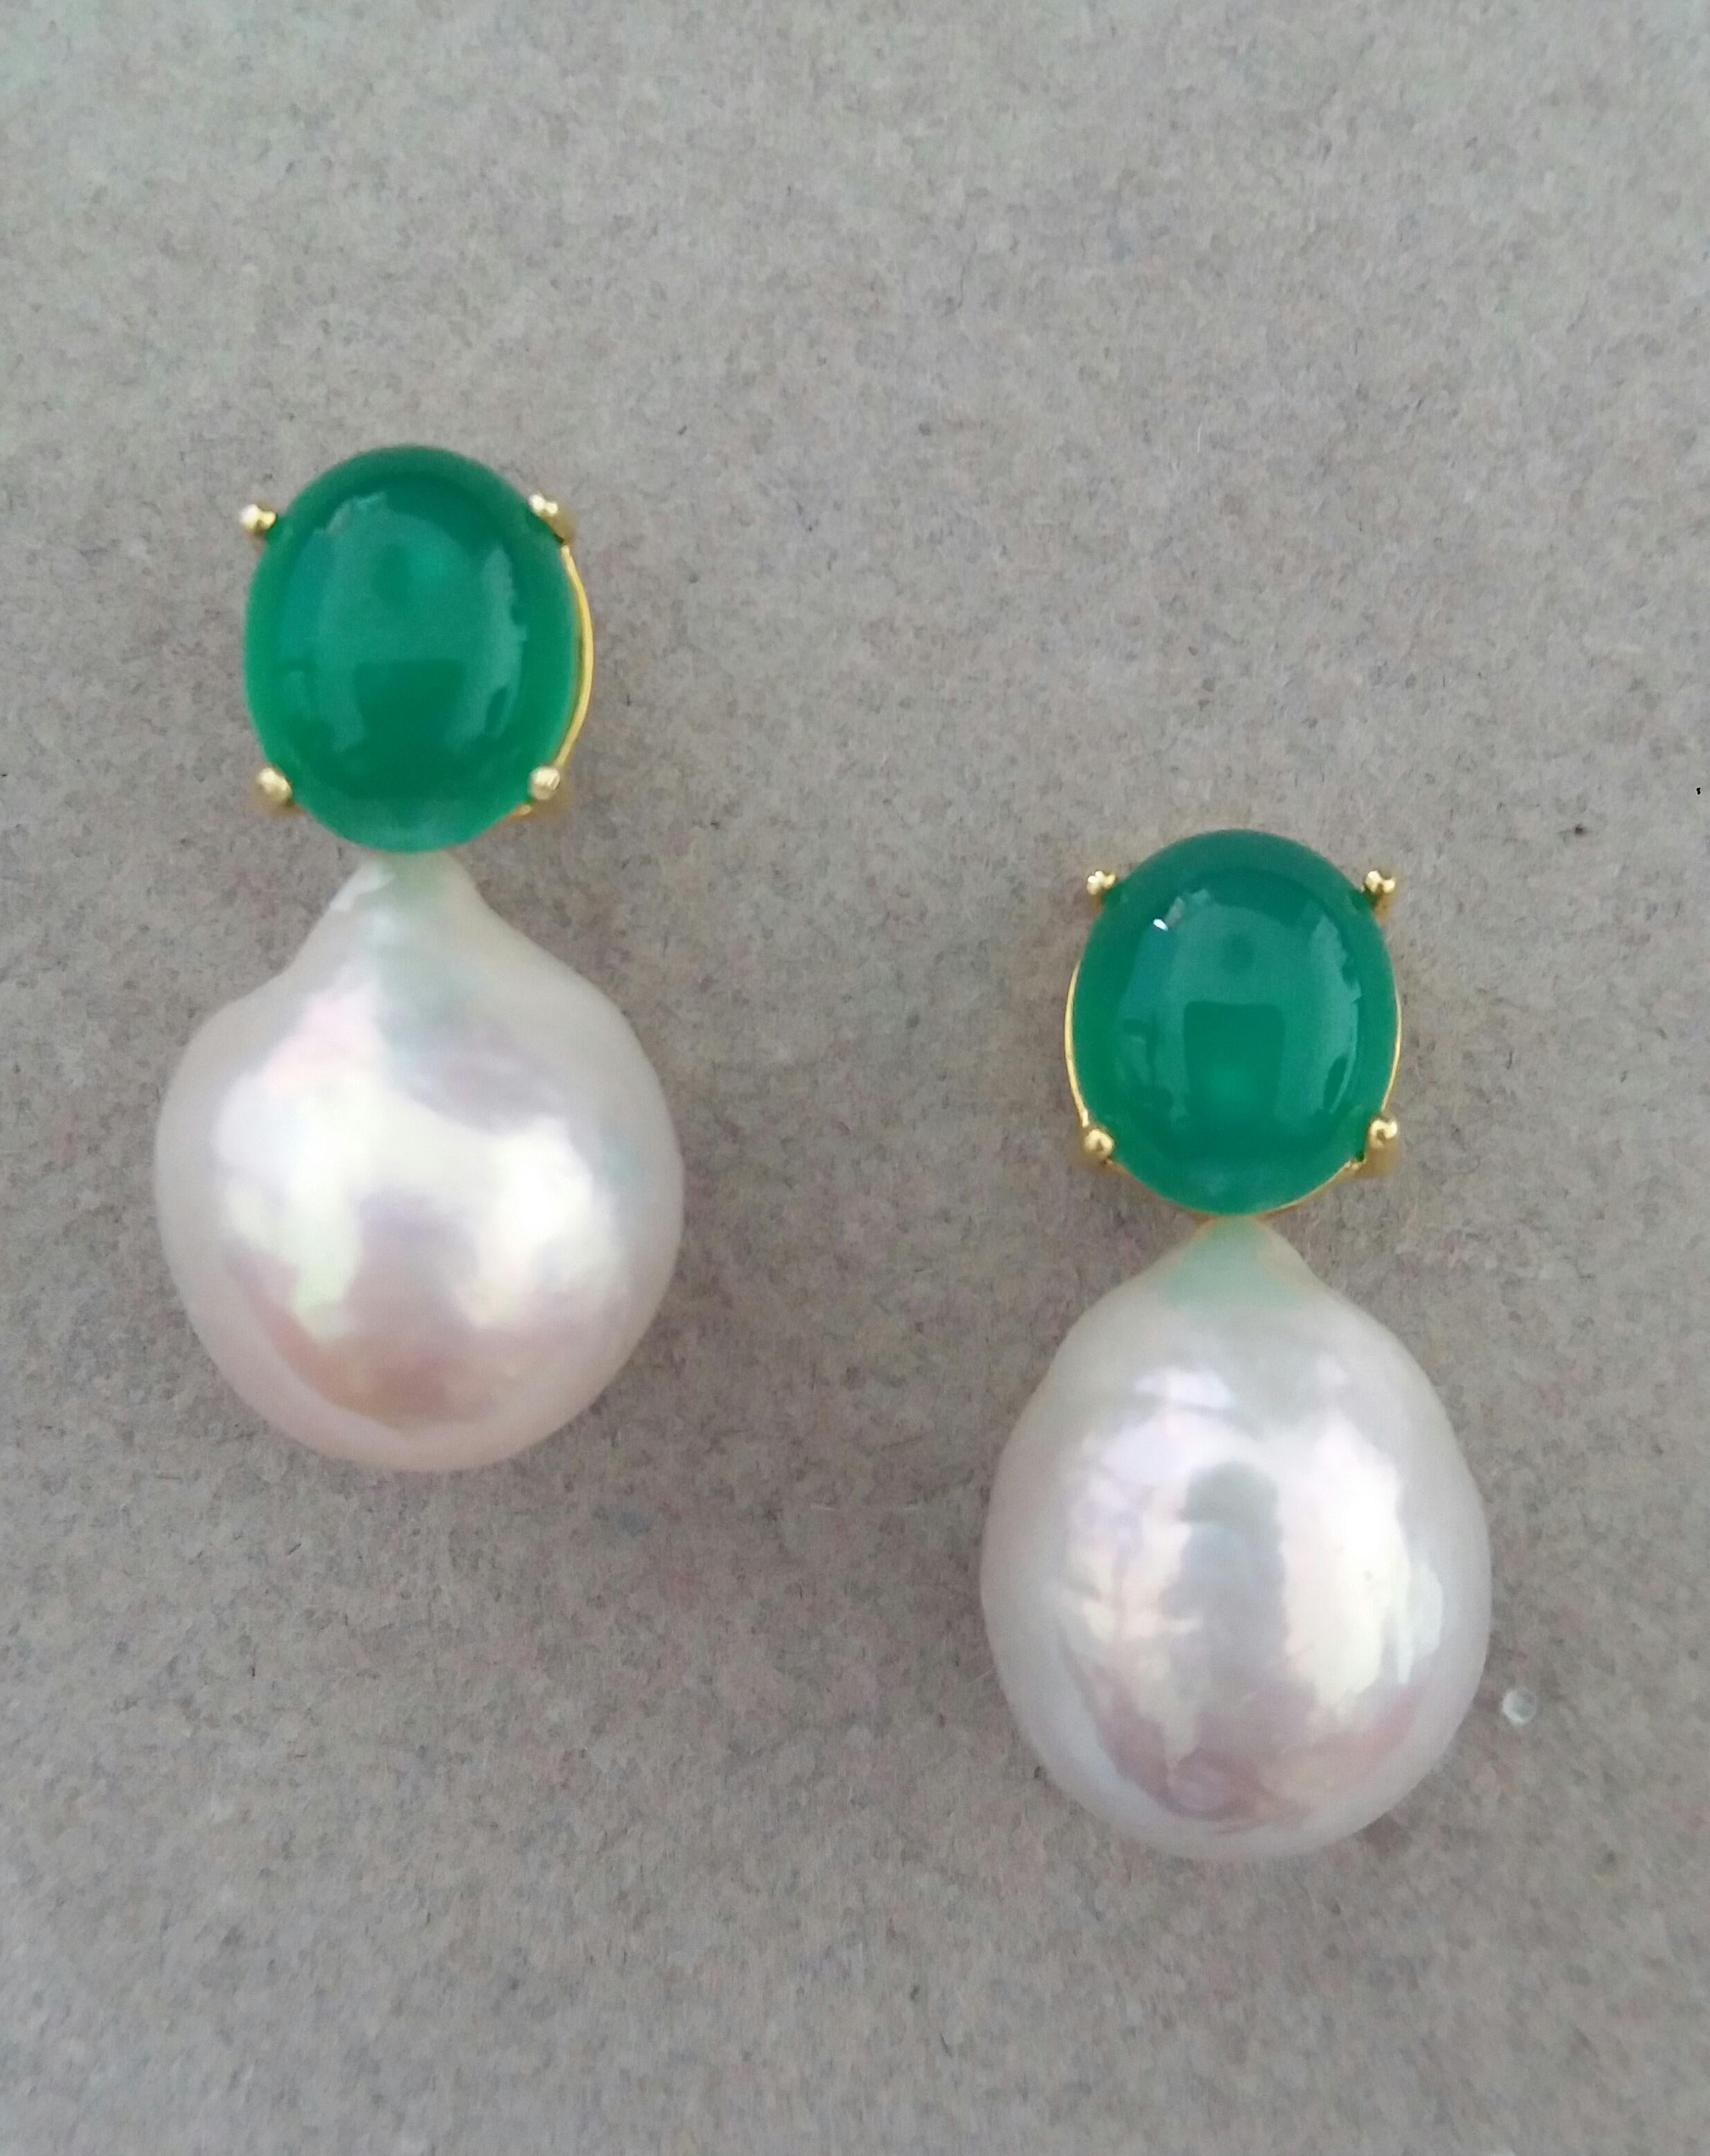 Simple chic stud earrings with a pair of Oval Green Onyx Cabs measuring 9 x 11 mm set in solid 14 Kt. yellow gold on the top and in the lower parts 2 unusual big size and excellent luster White Baroque Pearls measuring 14 x 17 mm and weighing 57